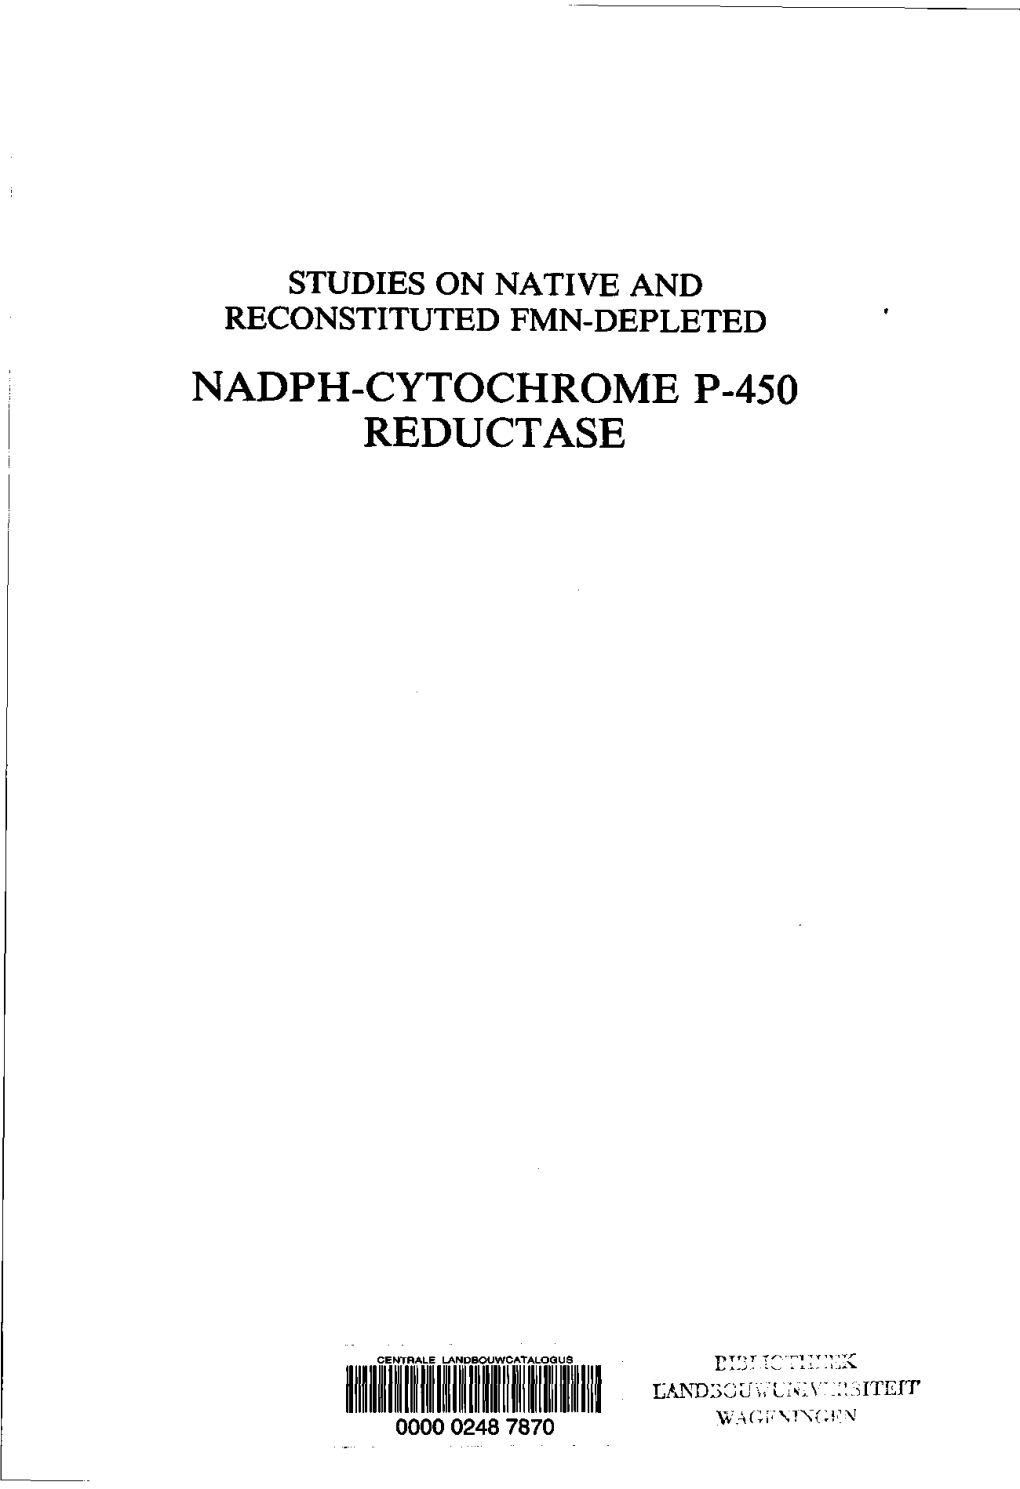 Nadph-Cytochrome P-450 Reductase